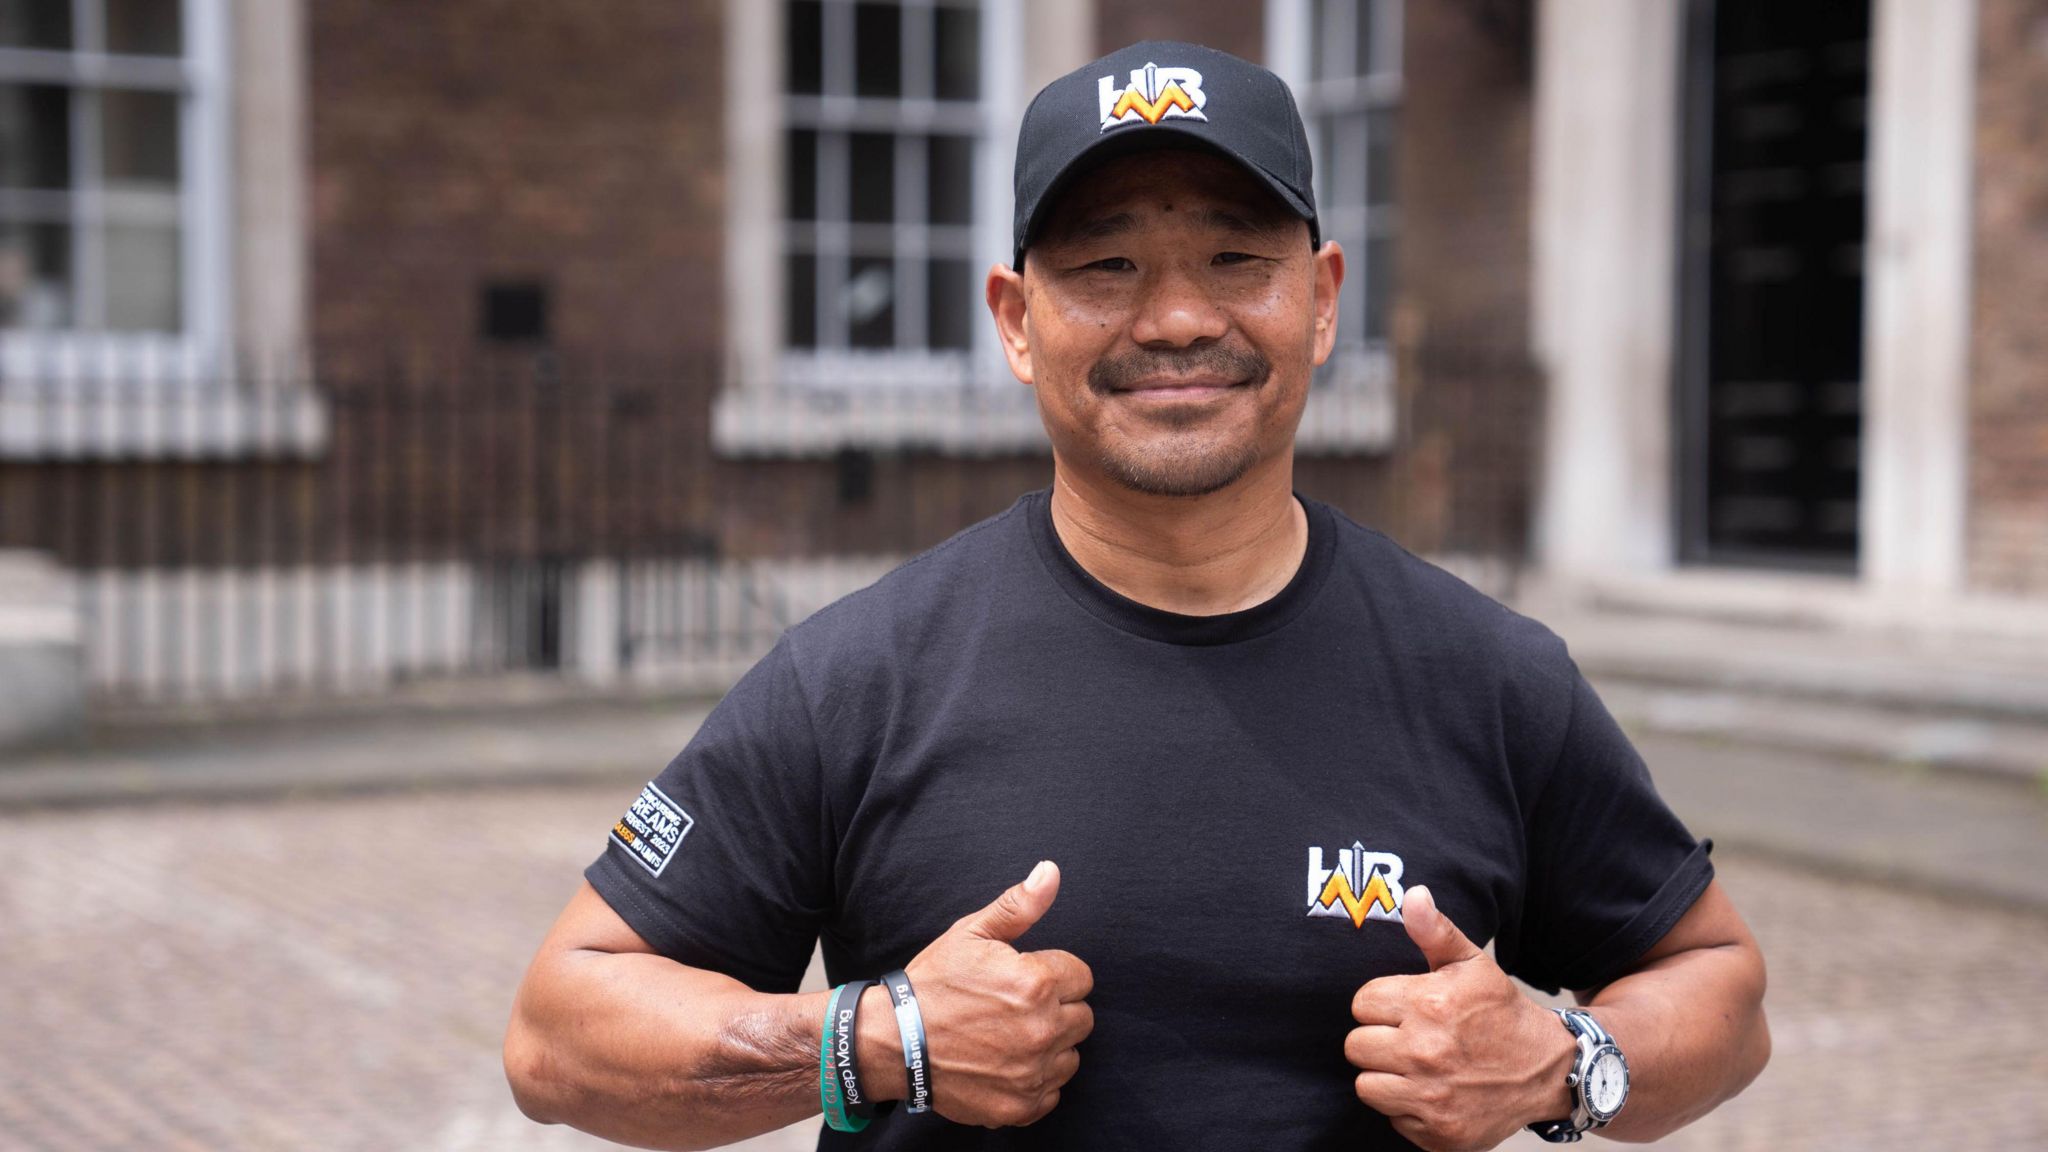 A man wearing a black hat and t-shirt, smiling with his thumbs up